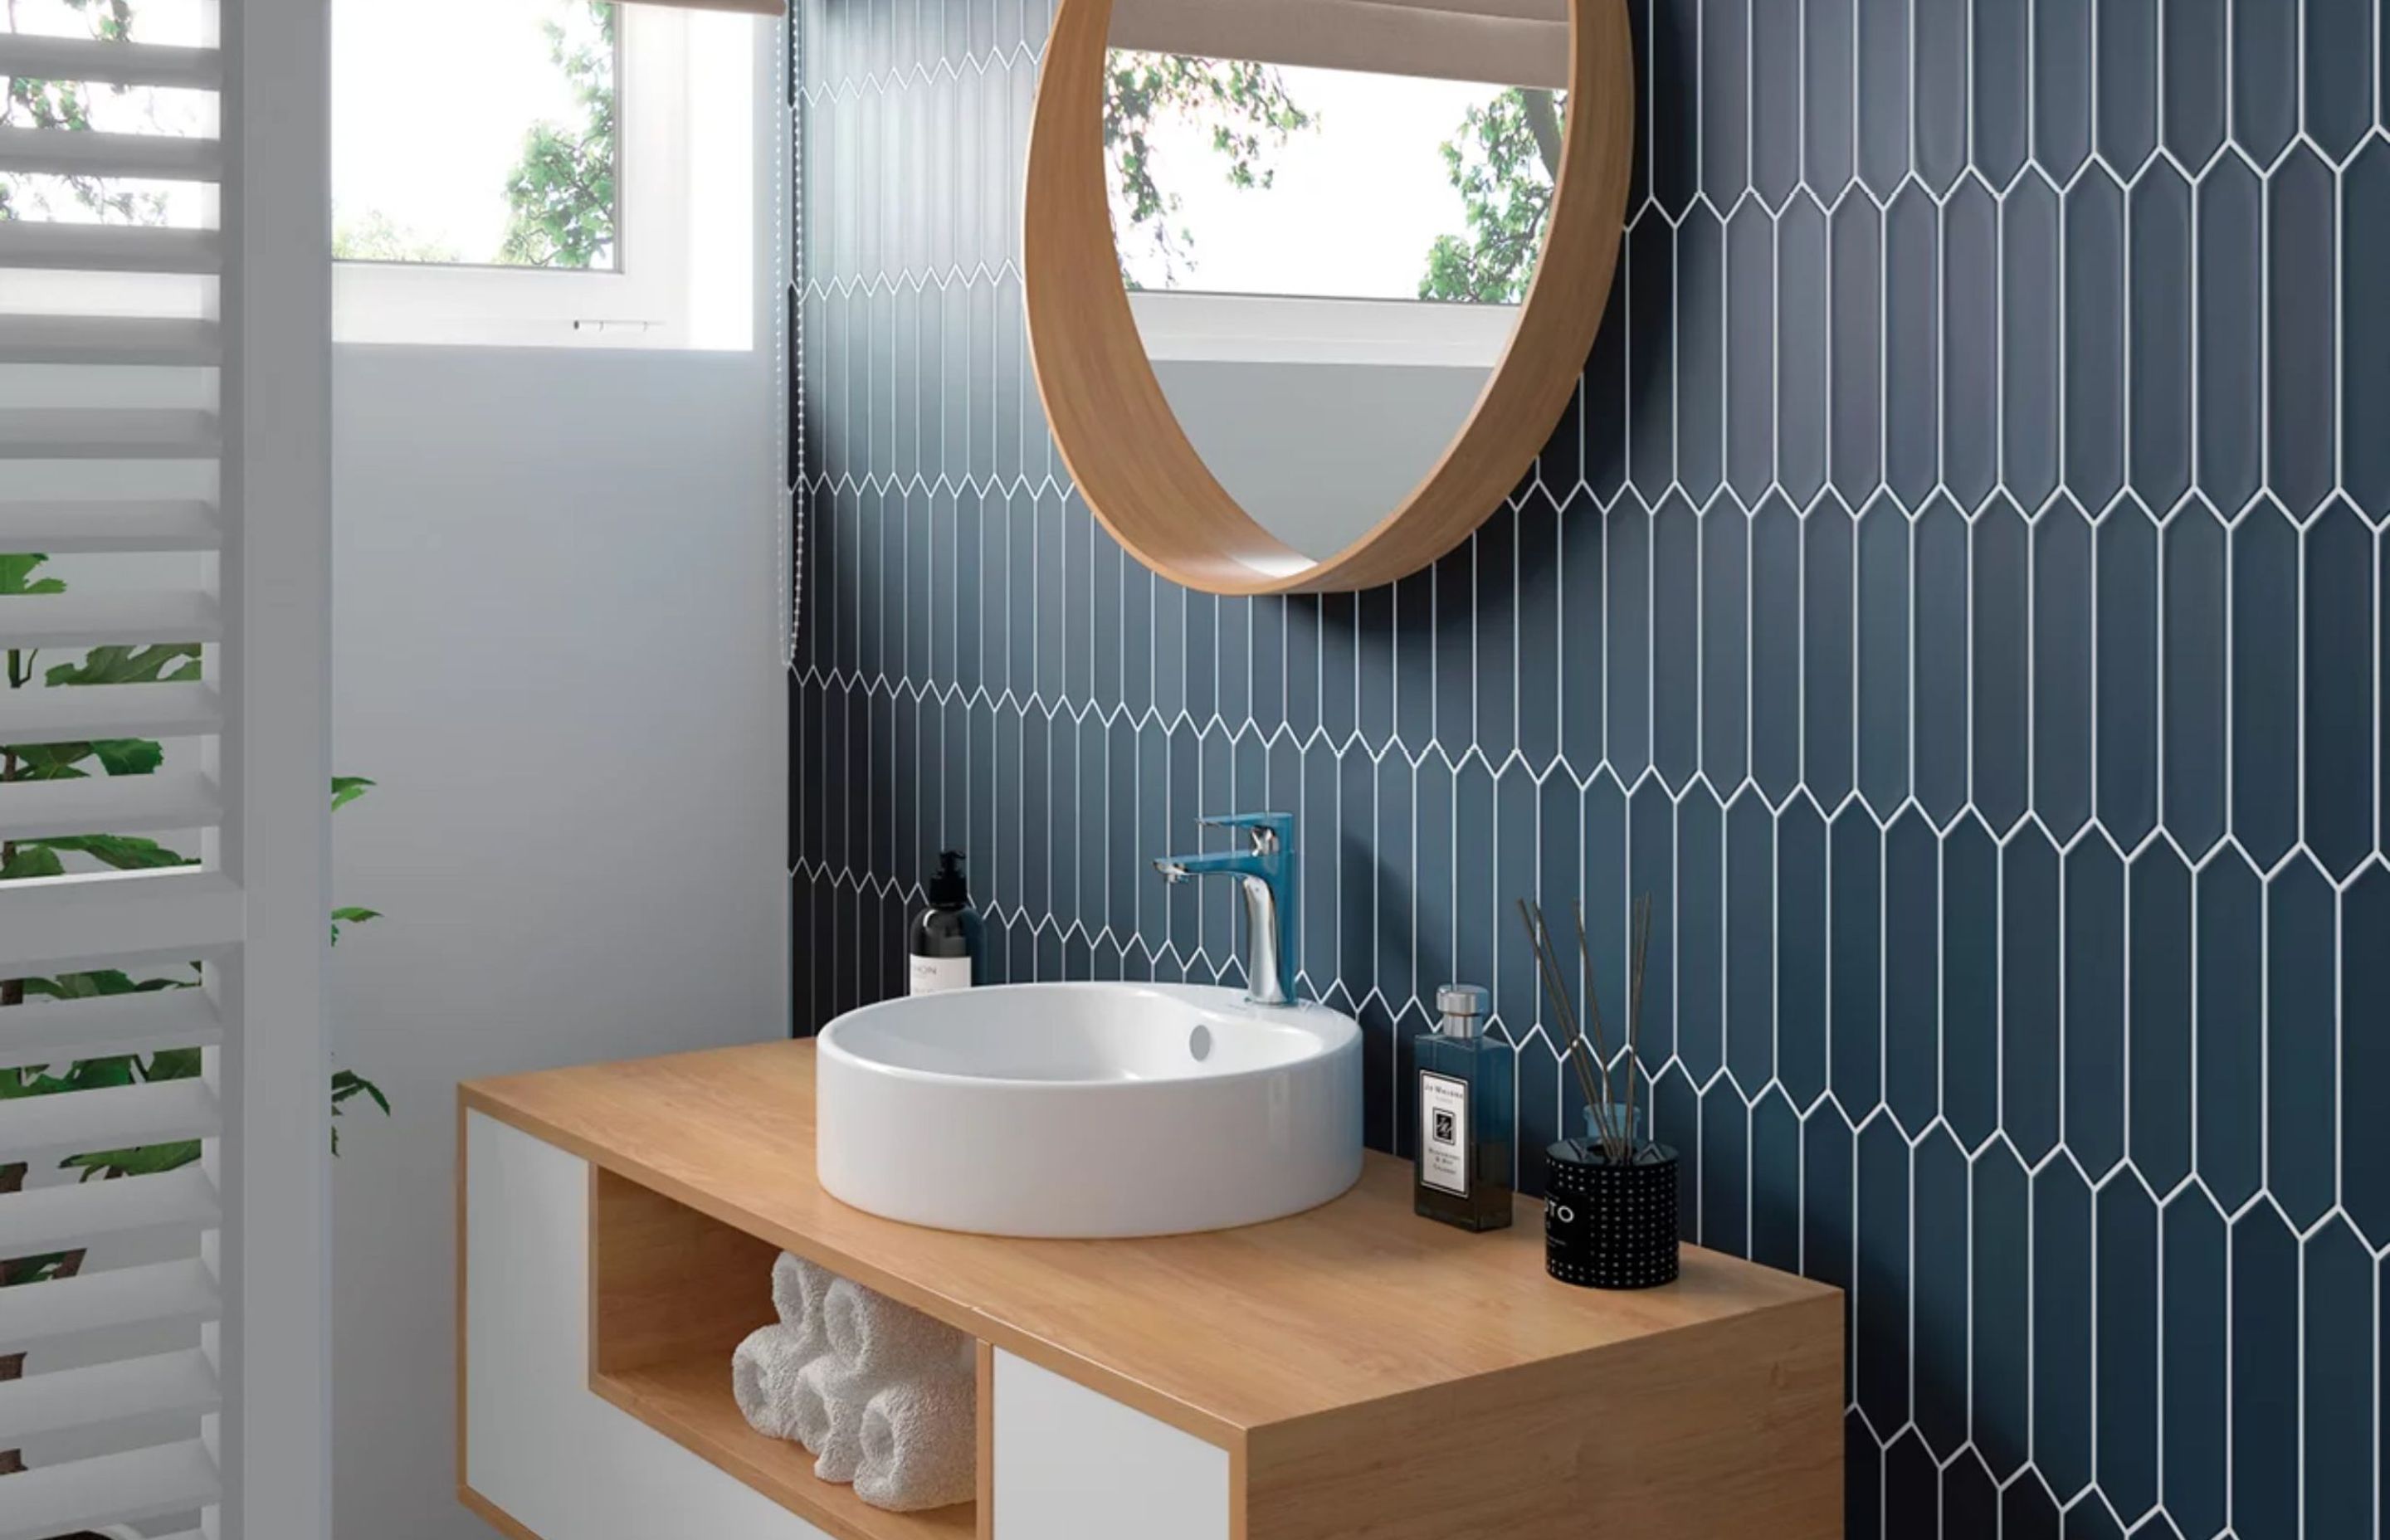 Smaller tiles offer versatility in awkwardly-shaped spaces.